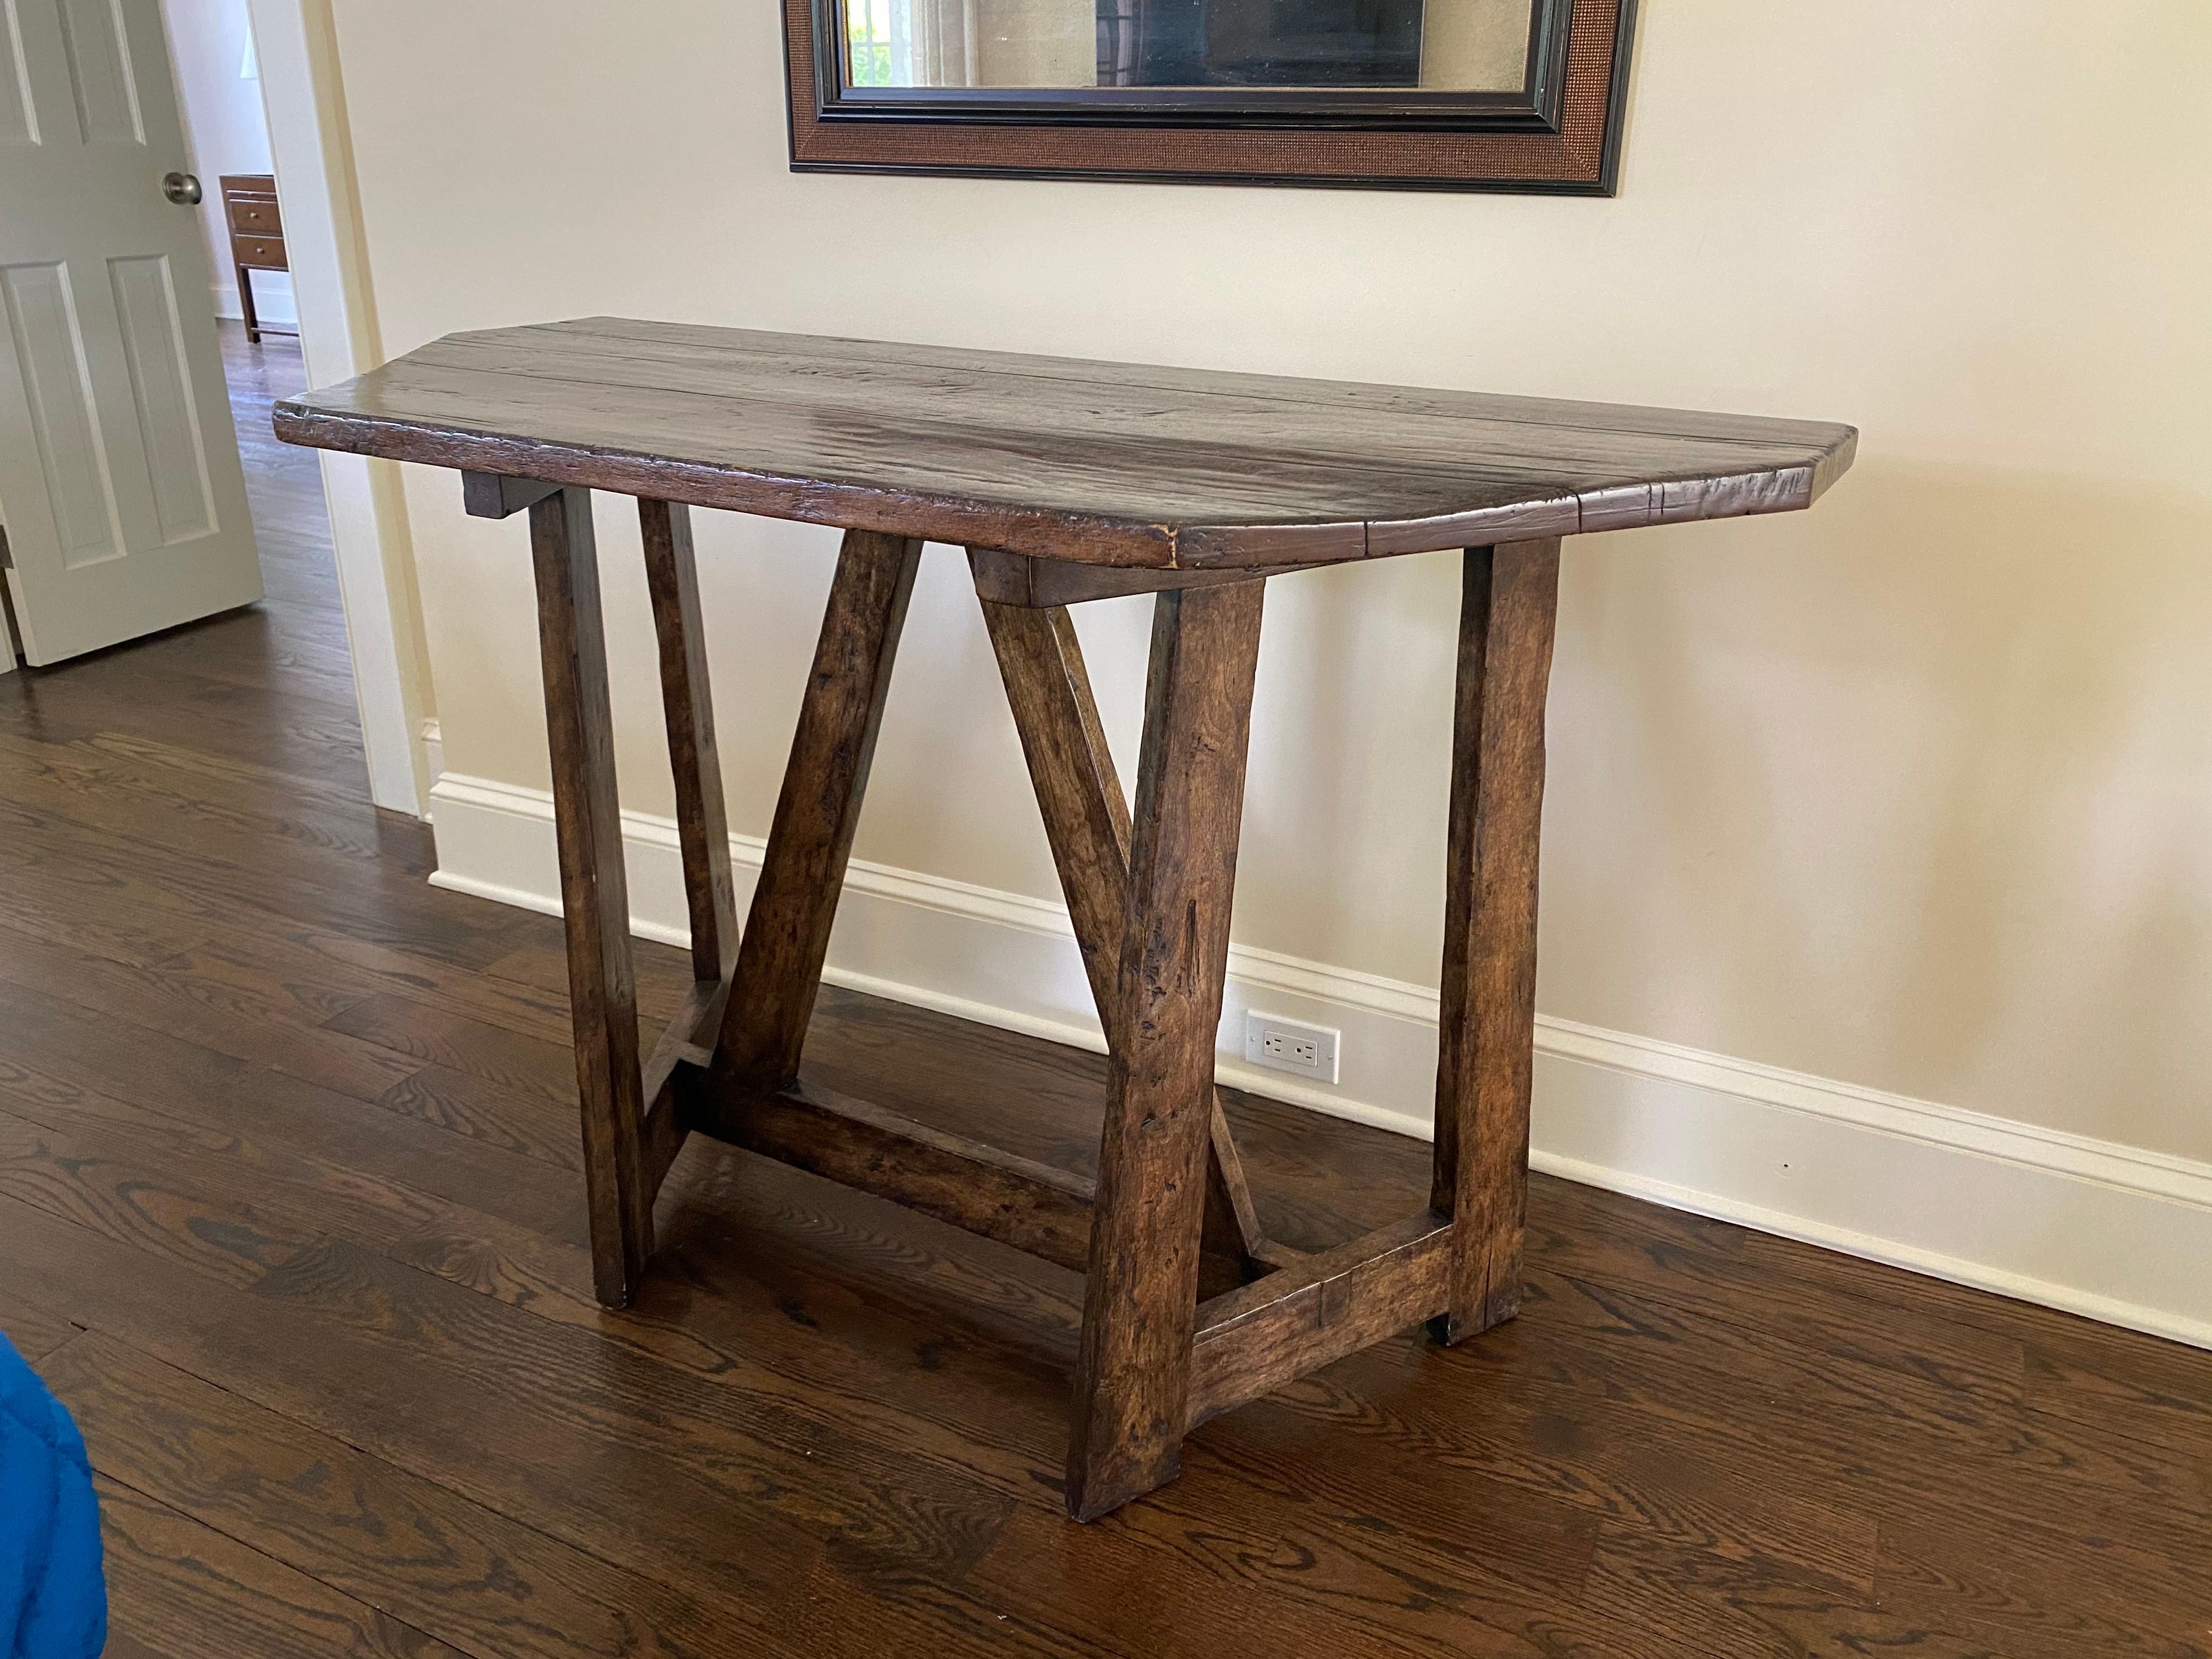 Custom made rustic console table, 21st century
H-Stretcher Base with angled supports, adding interest to the design. A newer table made to look older. Two consoles available. Some light wear and chips to finish on edges, shown in photos. Good